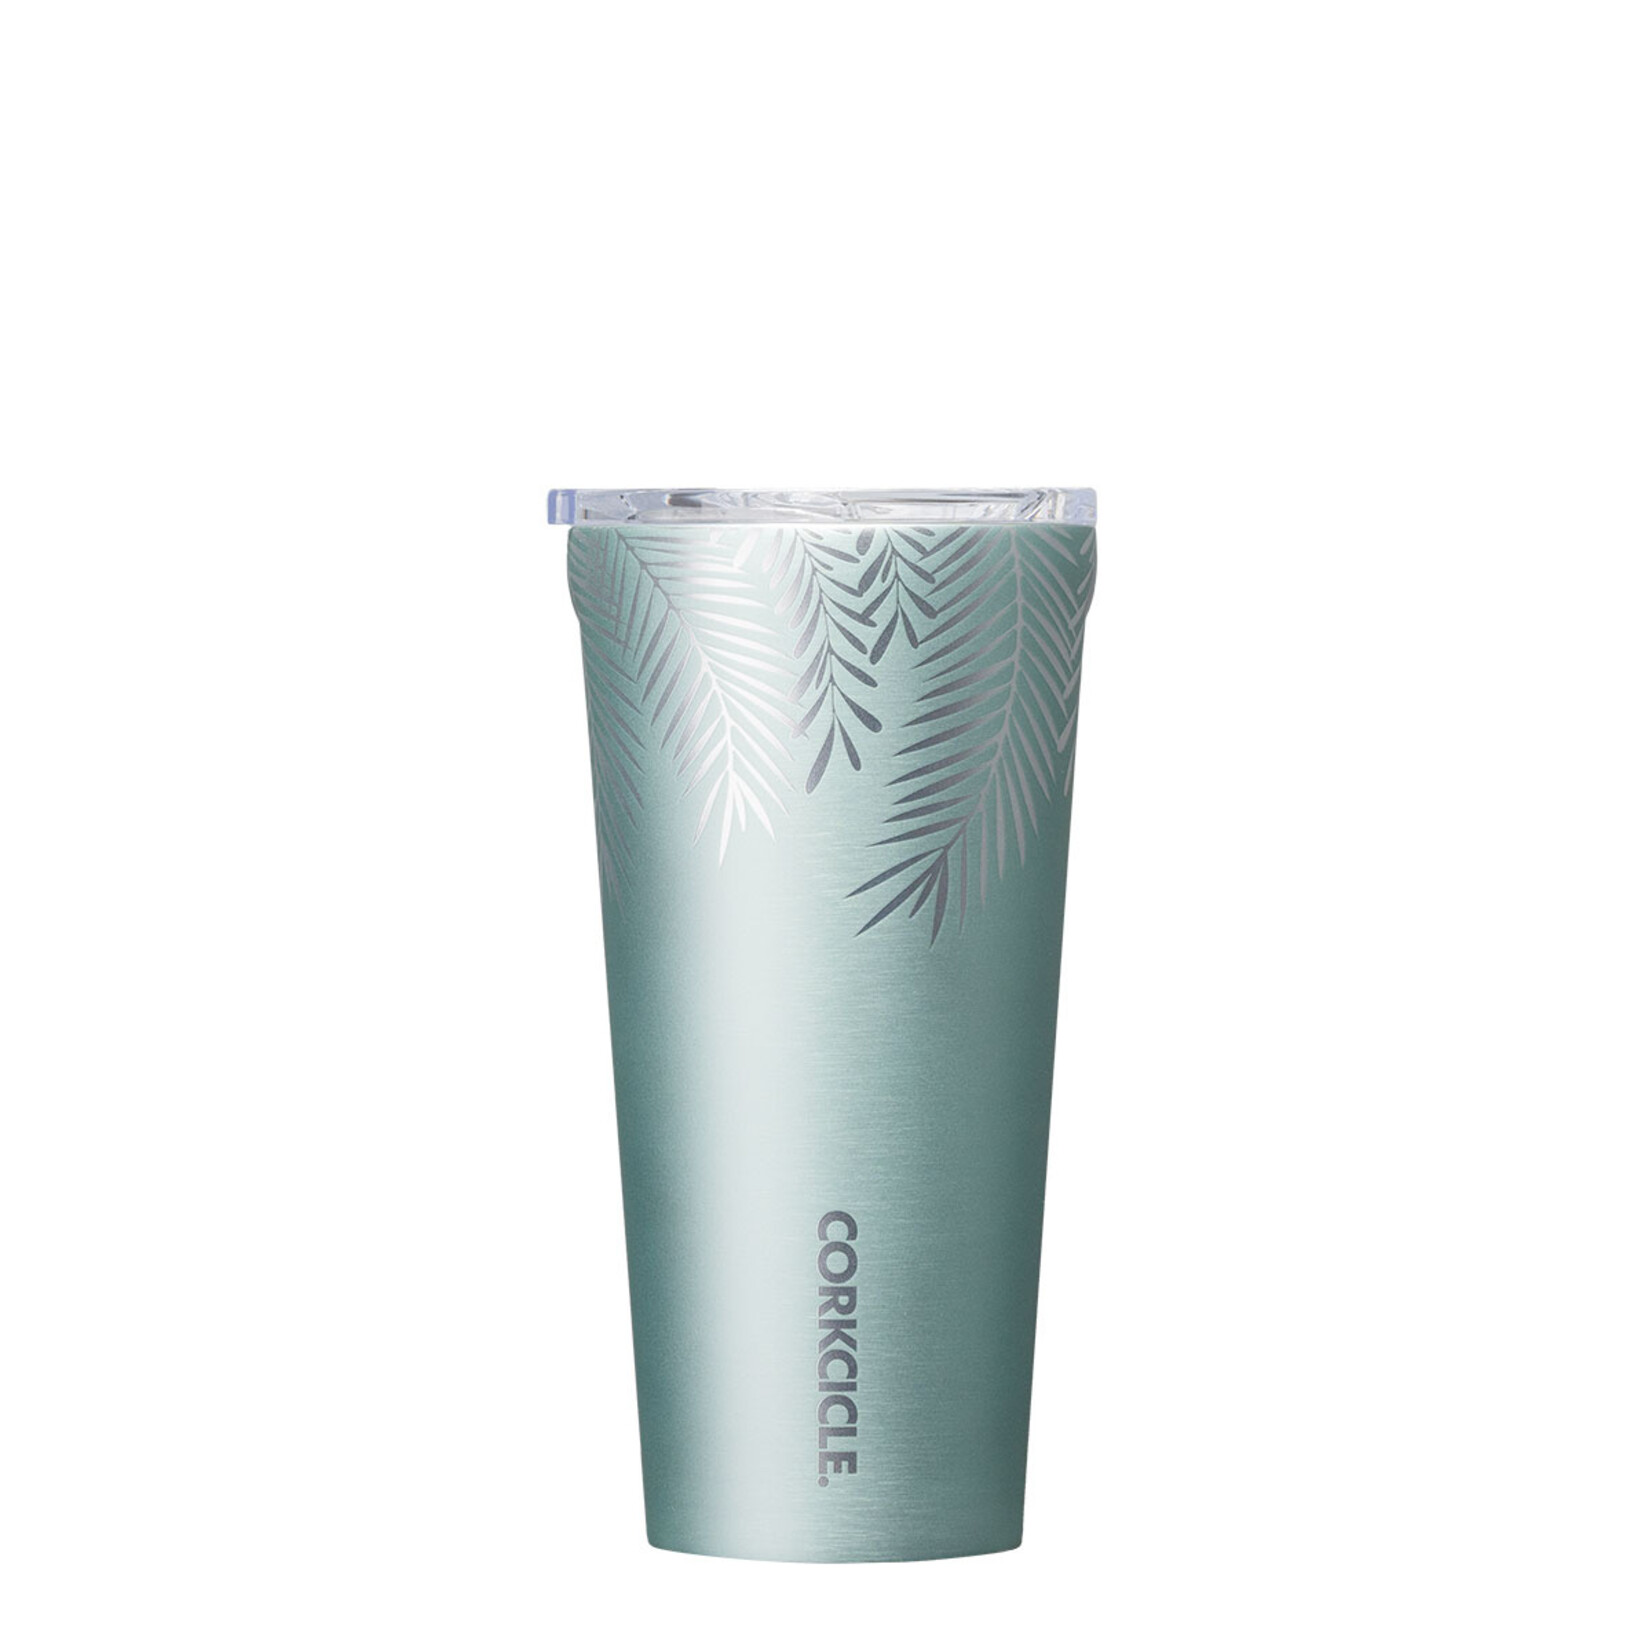 Corkcicle Corkcicle - 16 oz Tumbler - Frosted Pines Jade